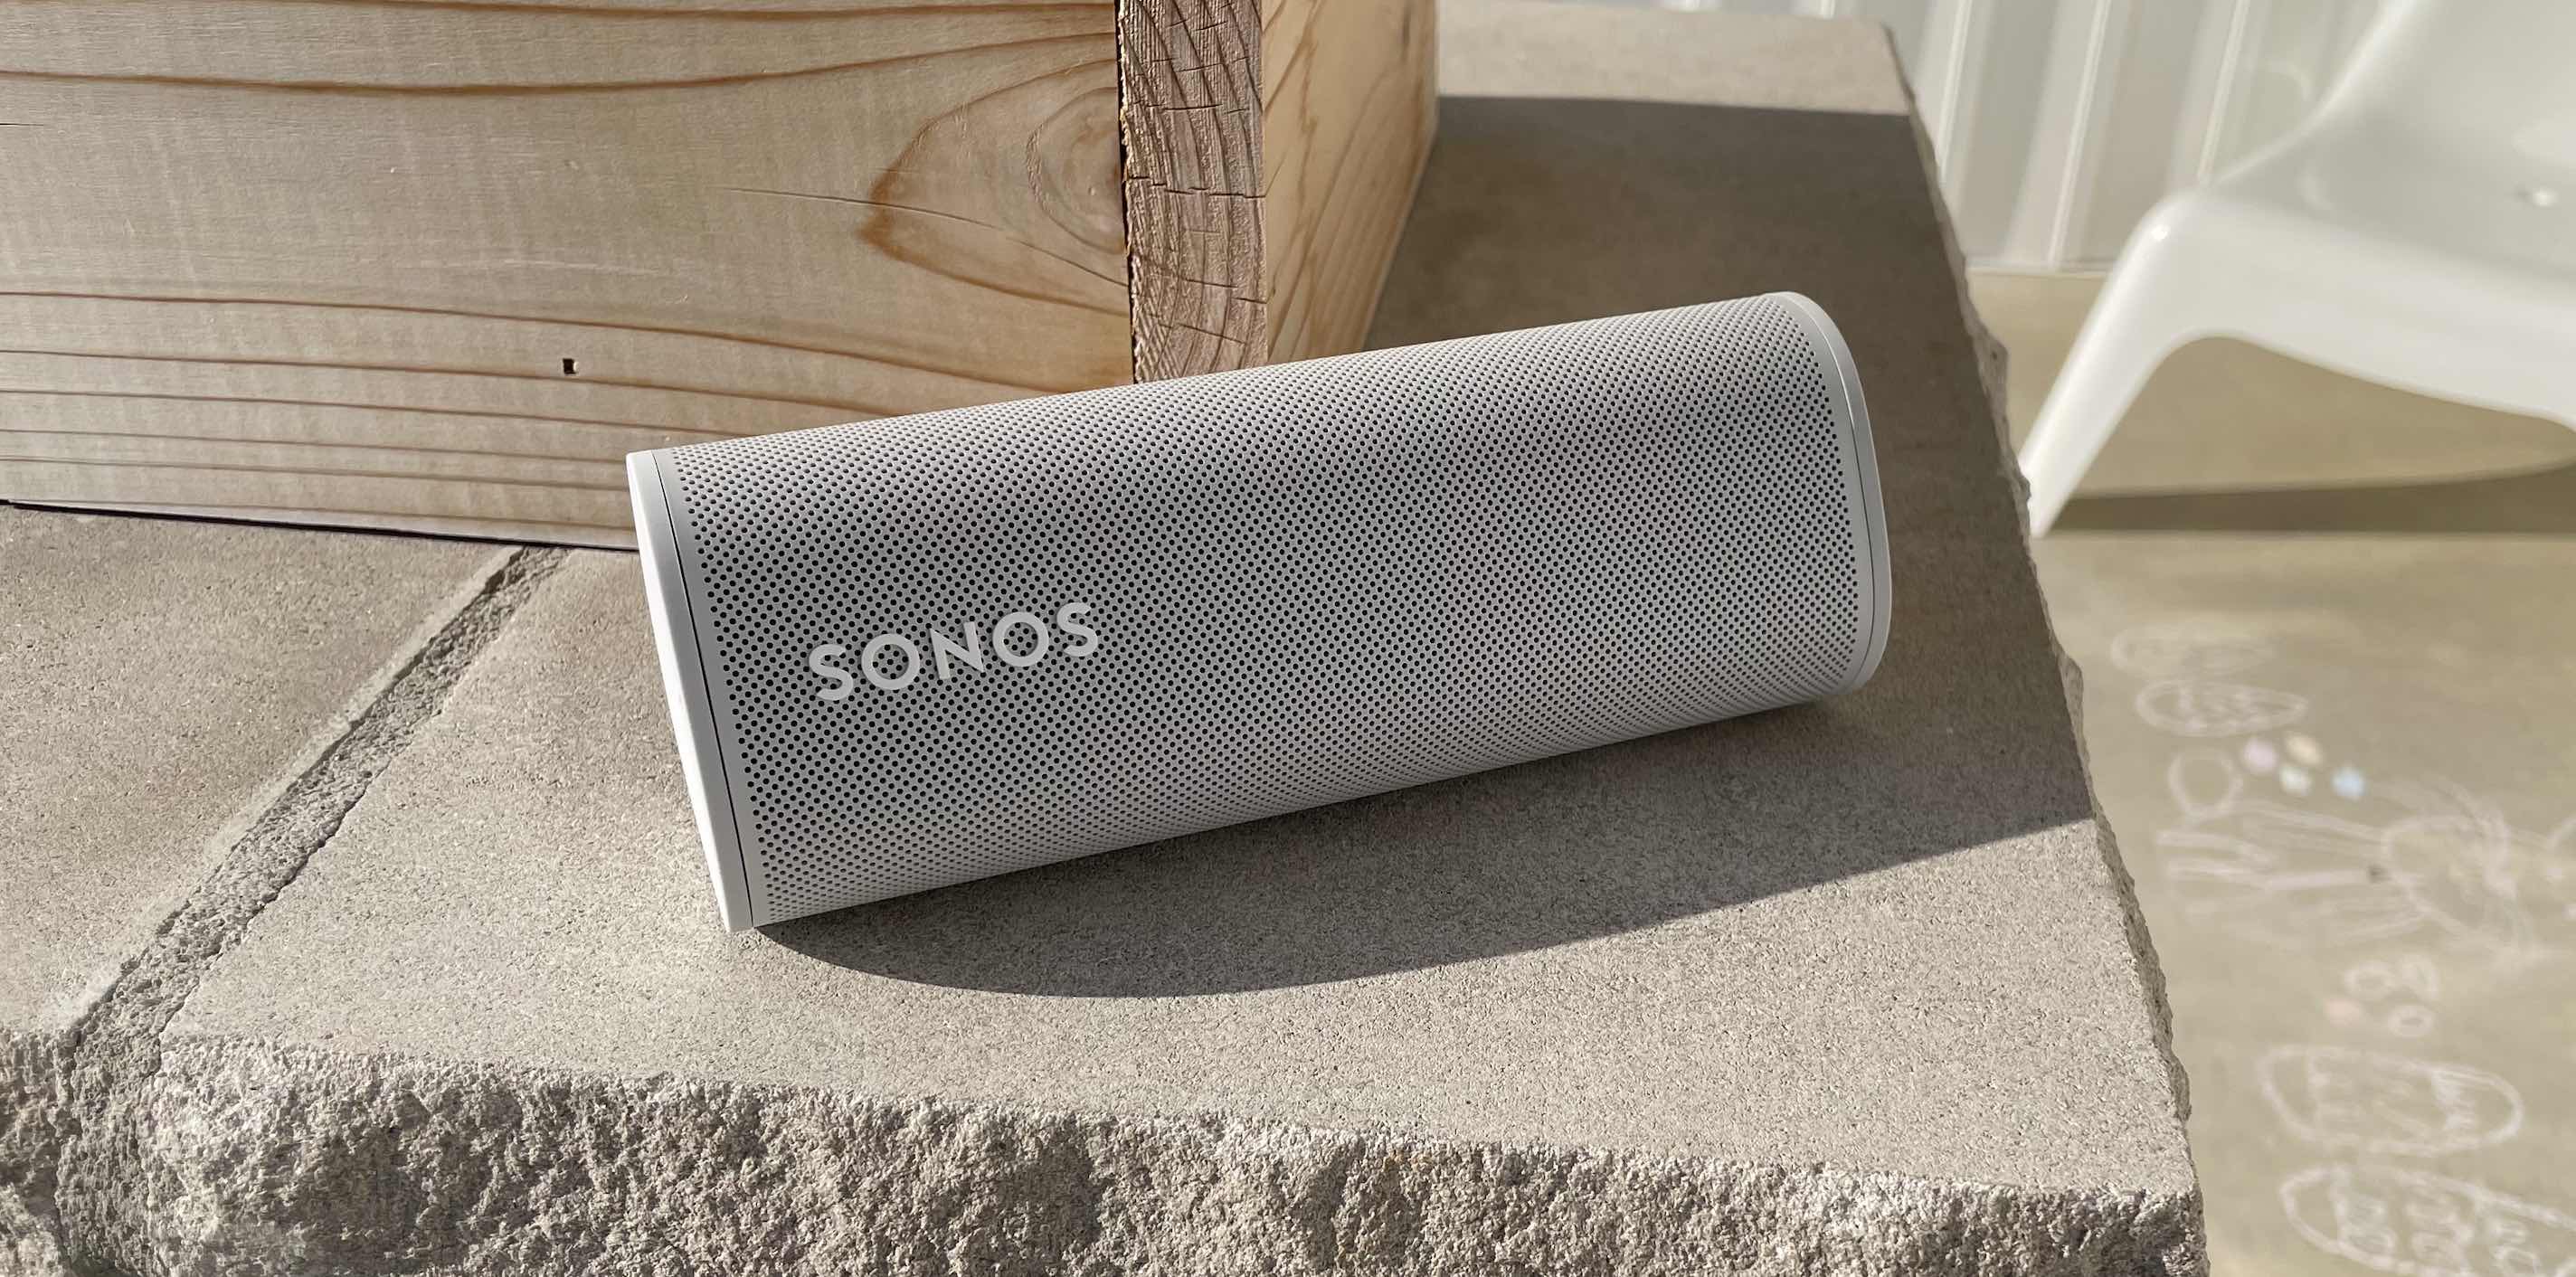 Sonos Roam ultra-portable speaker with AirPlay review – side shot